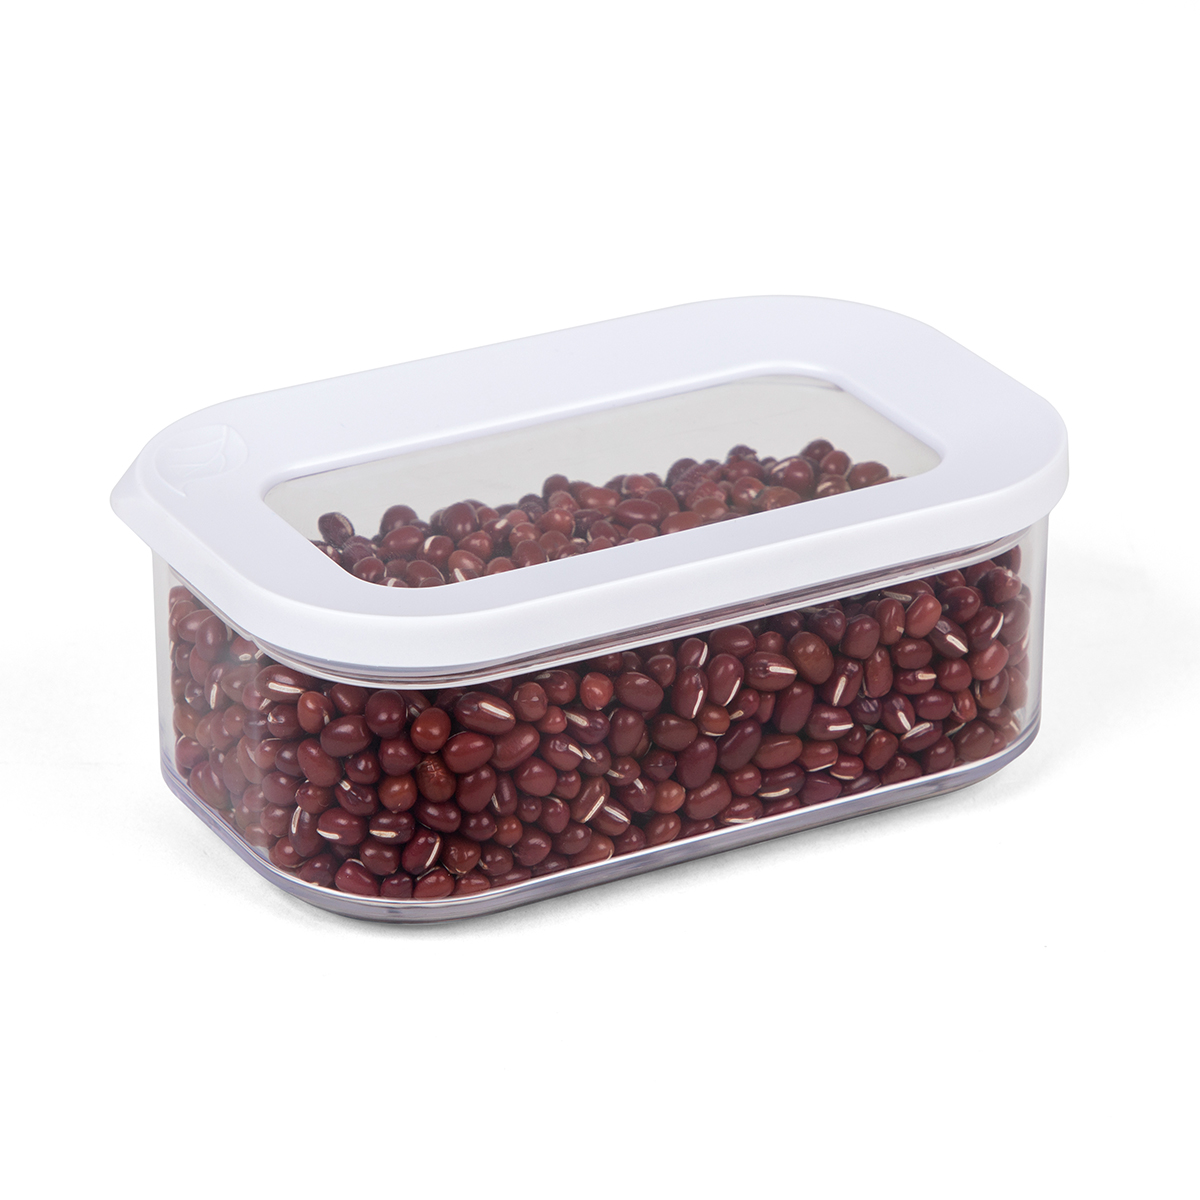 Stackable Cereal Food Storage Container Set